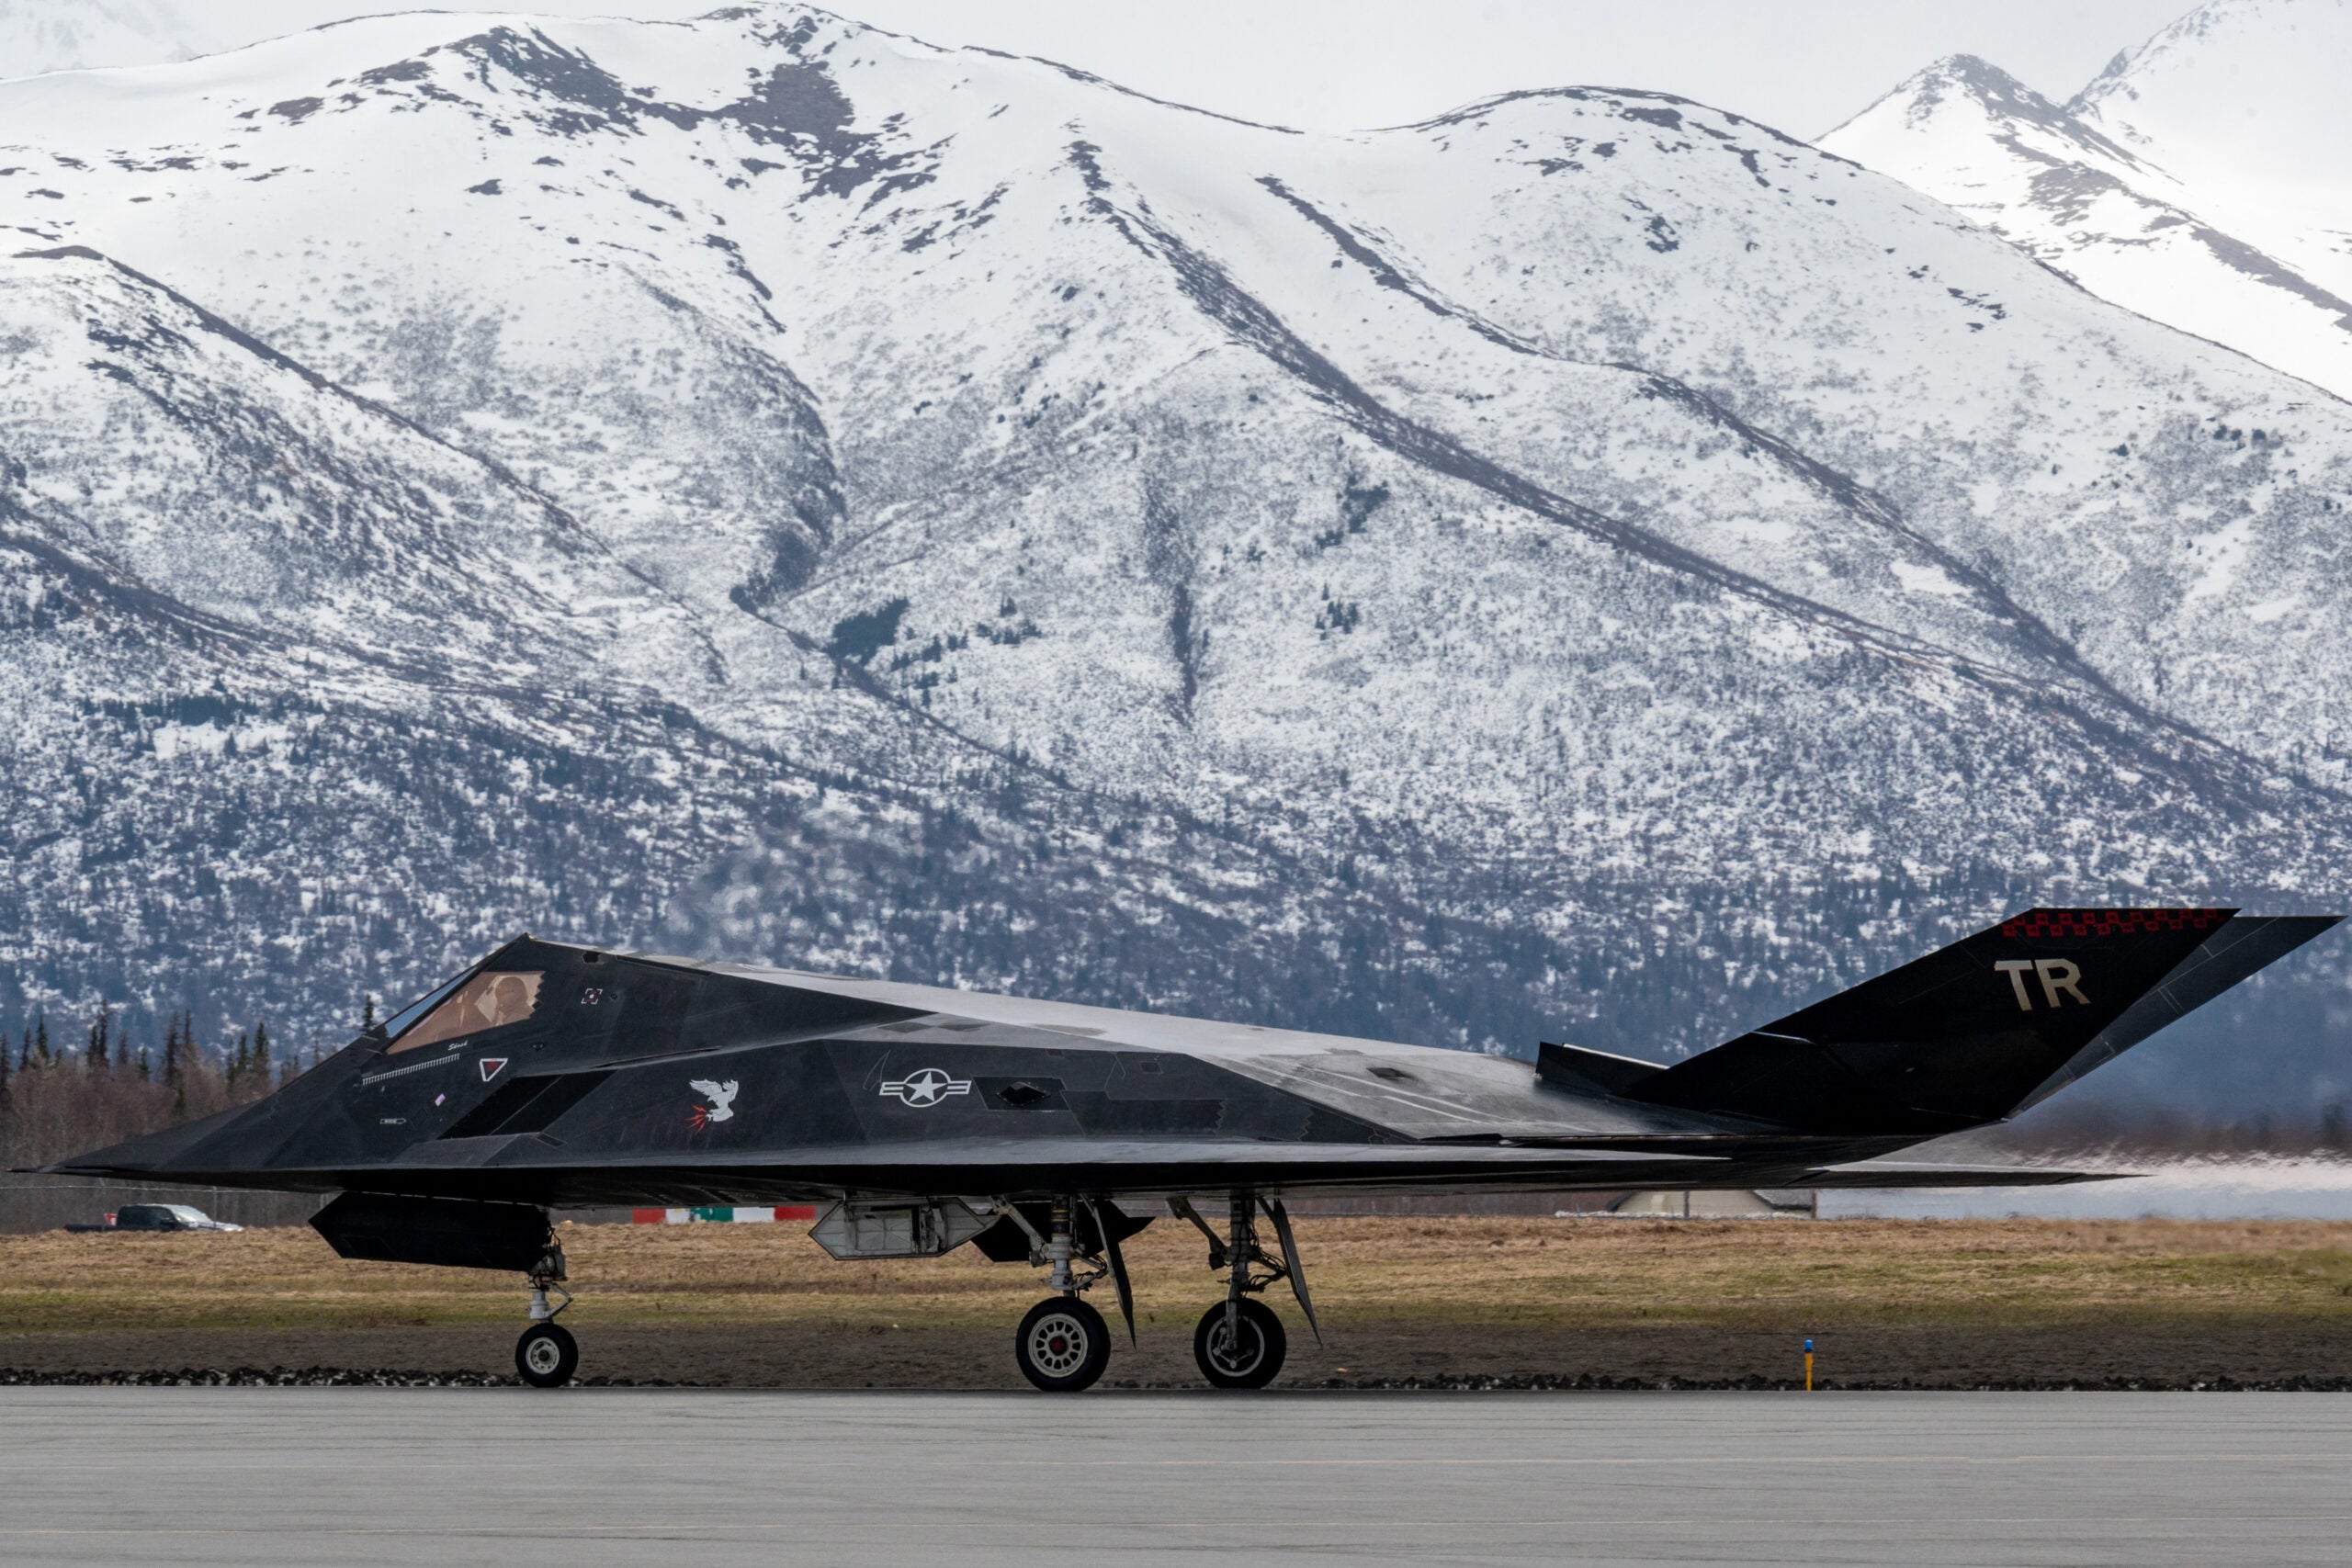 A U.S. Air Force F-117 Nighthawk lands at Joint Base Elmendorf-Richardson, Alaska during Northern Edge 23-1, May 10, 2023. NE 23-1 provides an opportunity for joint, multinational and multi-domain operations designed to implement high-end, realistic war fighter training, develop and improve joint interoperability, and enhance the combat readiness of participating forces. (U.S. Air Force photo by Sheila deVera)